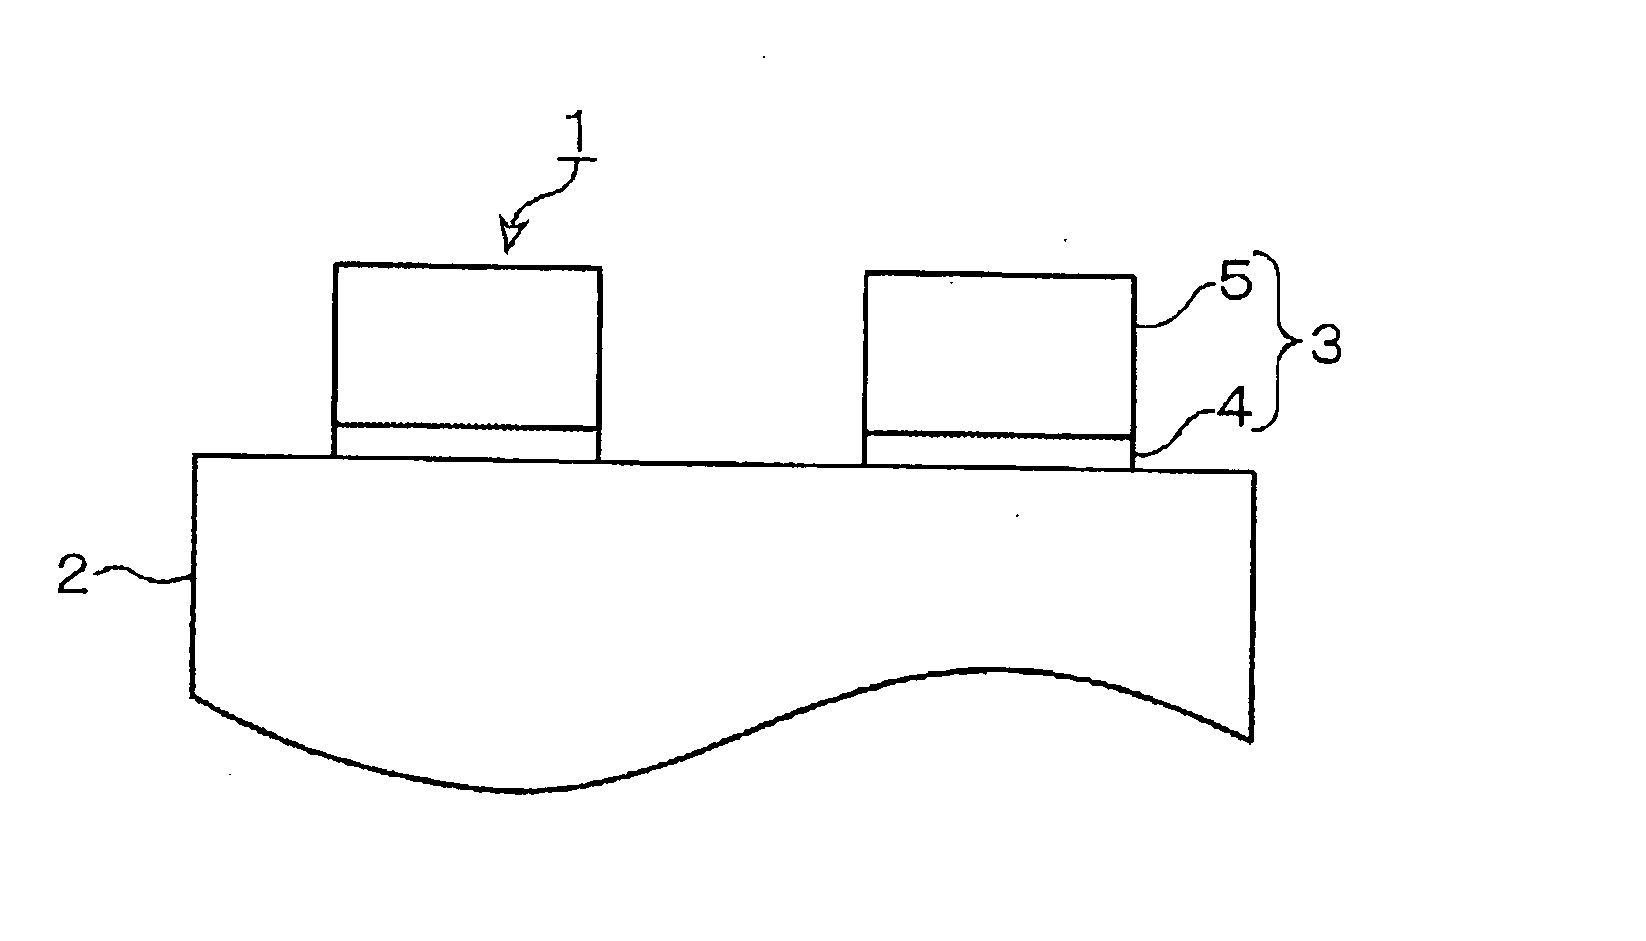 Surface acoustic wave device and method of manufacturing the same